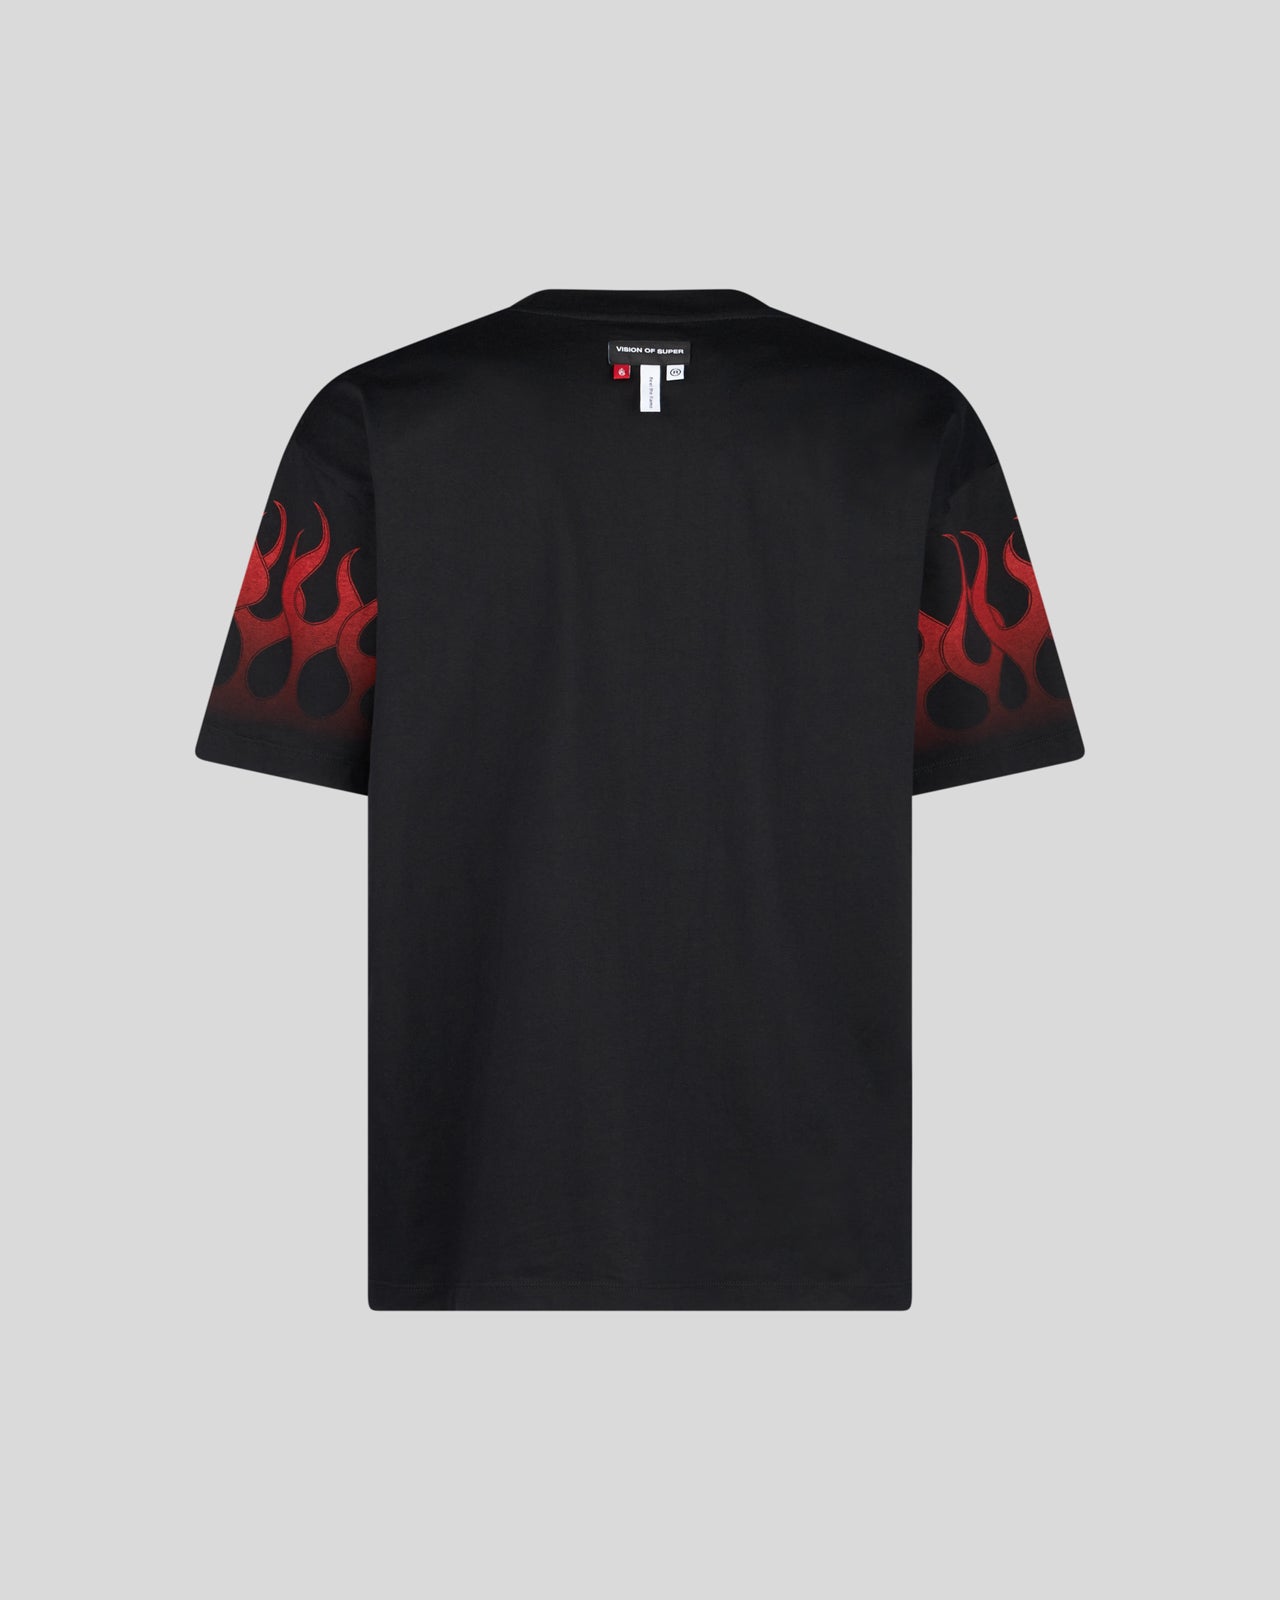 VISION OF SUPER BLACK TSHIRT WITH RED RACING FLAMES